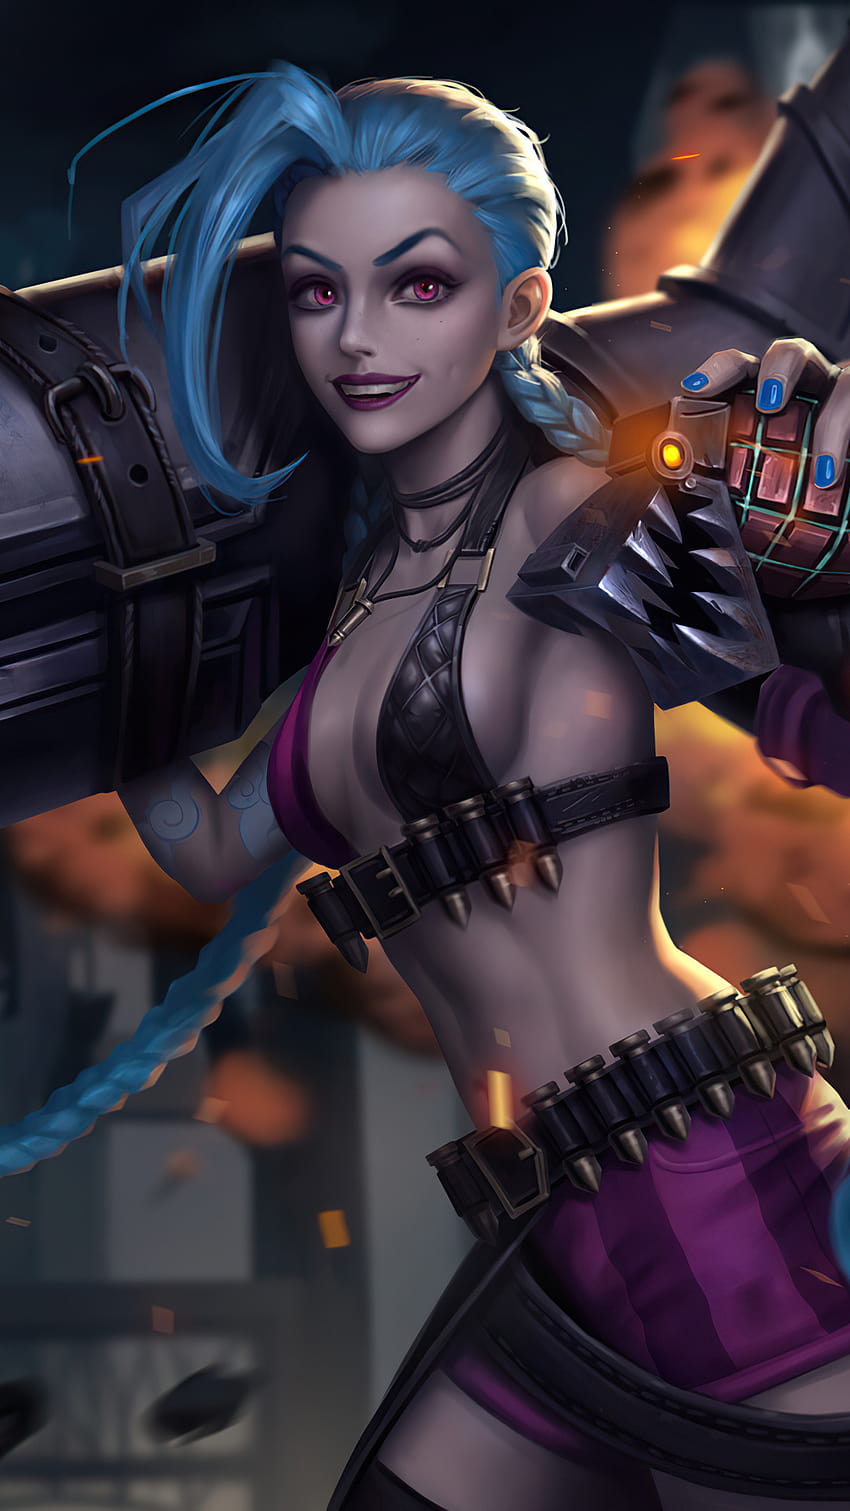 1080x1920 League Of Legends Jinx Iphone 7,6s,6 Plus, Pixel xl ,One Plus 3,3t,5 , Backgrounds, and HD phone wallpaper